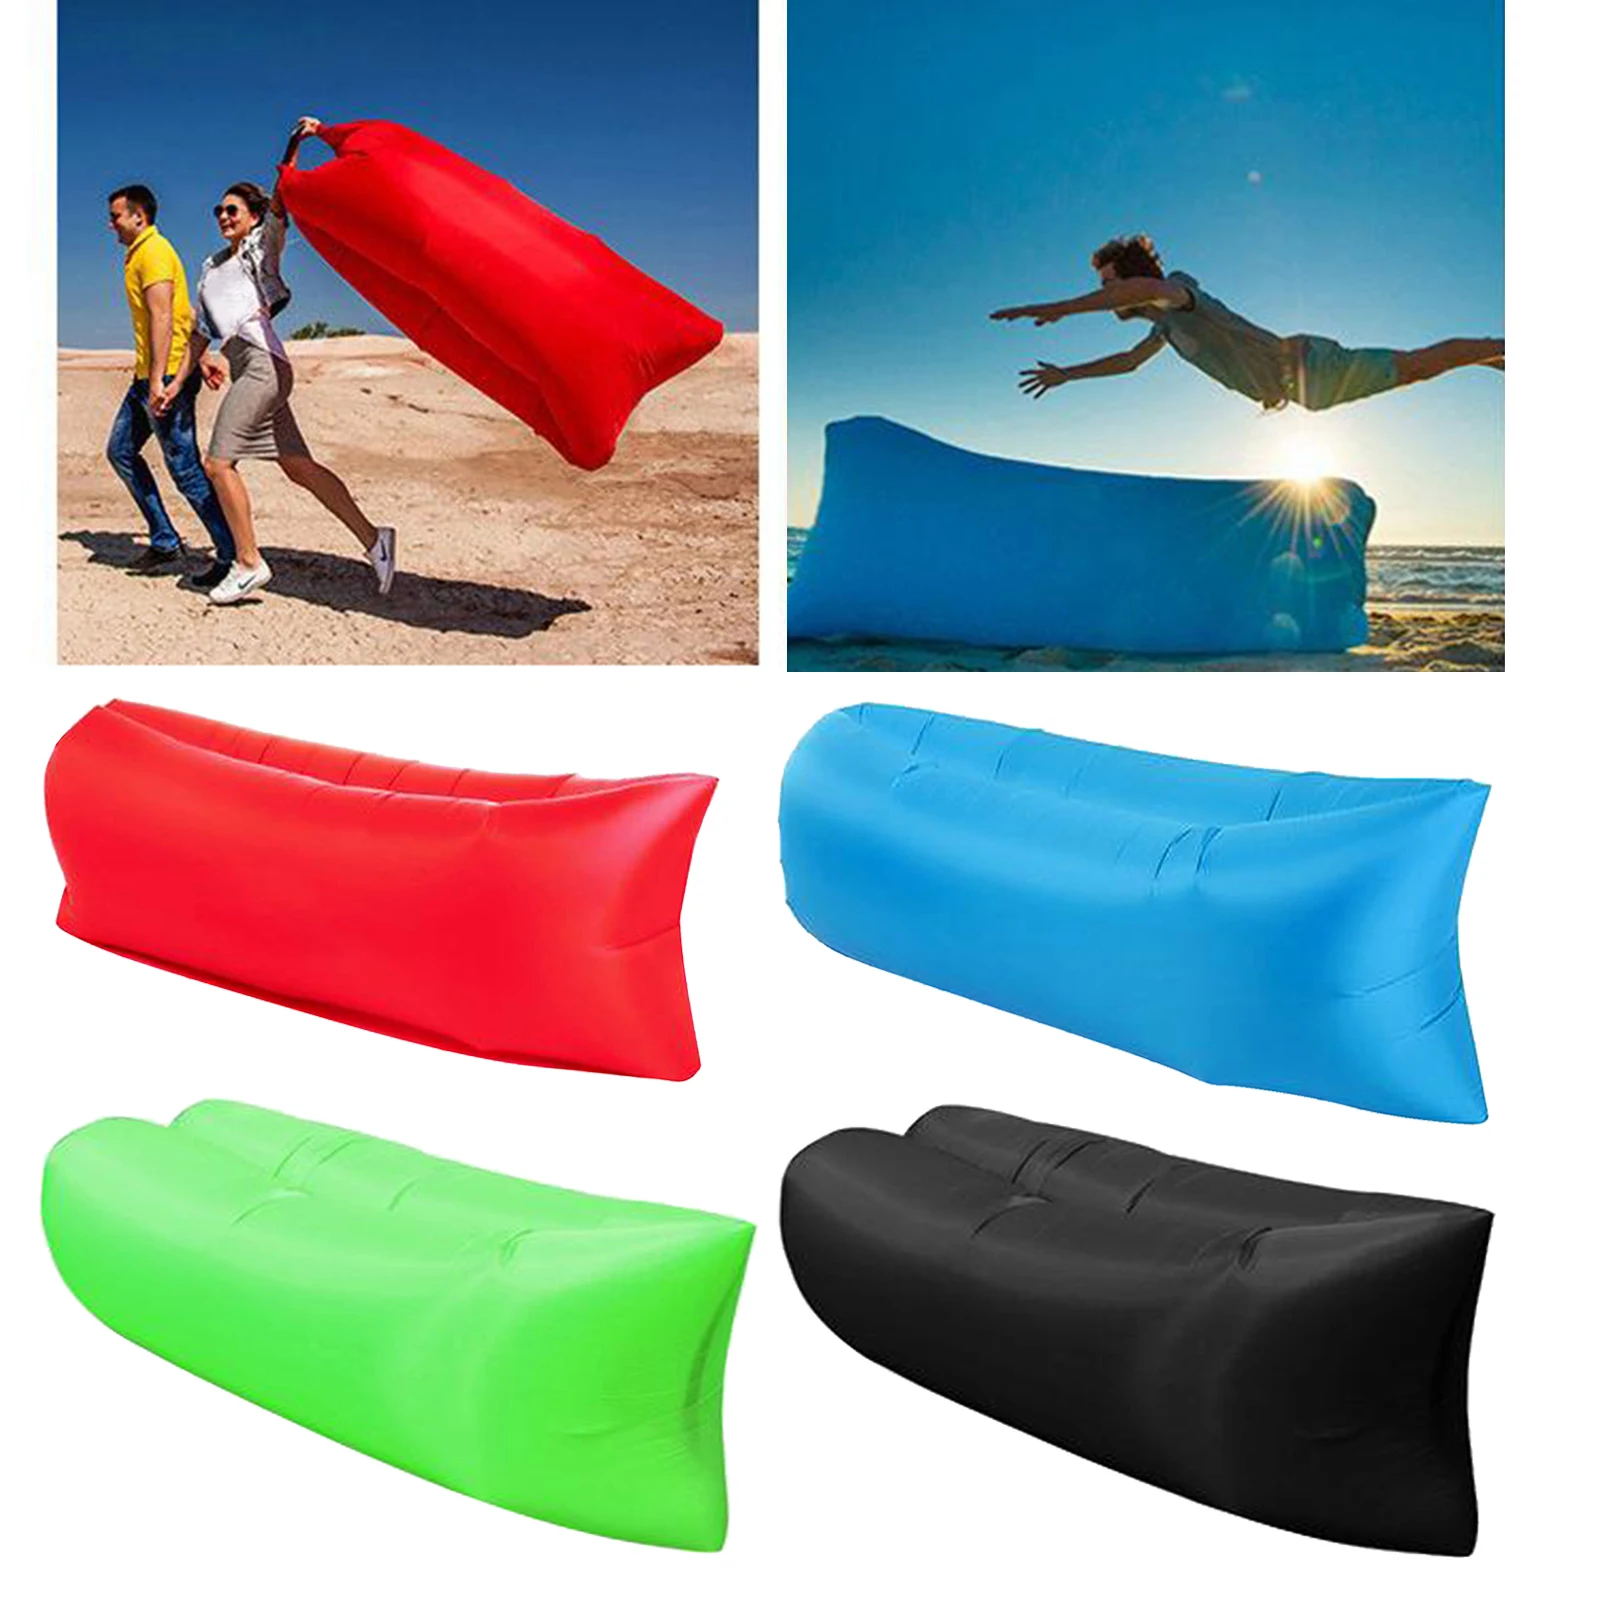 Lazy Inflatable Air Bed Sofa Lounger Couch Chair Bag Hangout Camping Beach Chair 